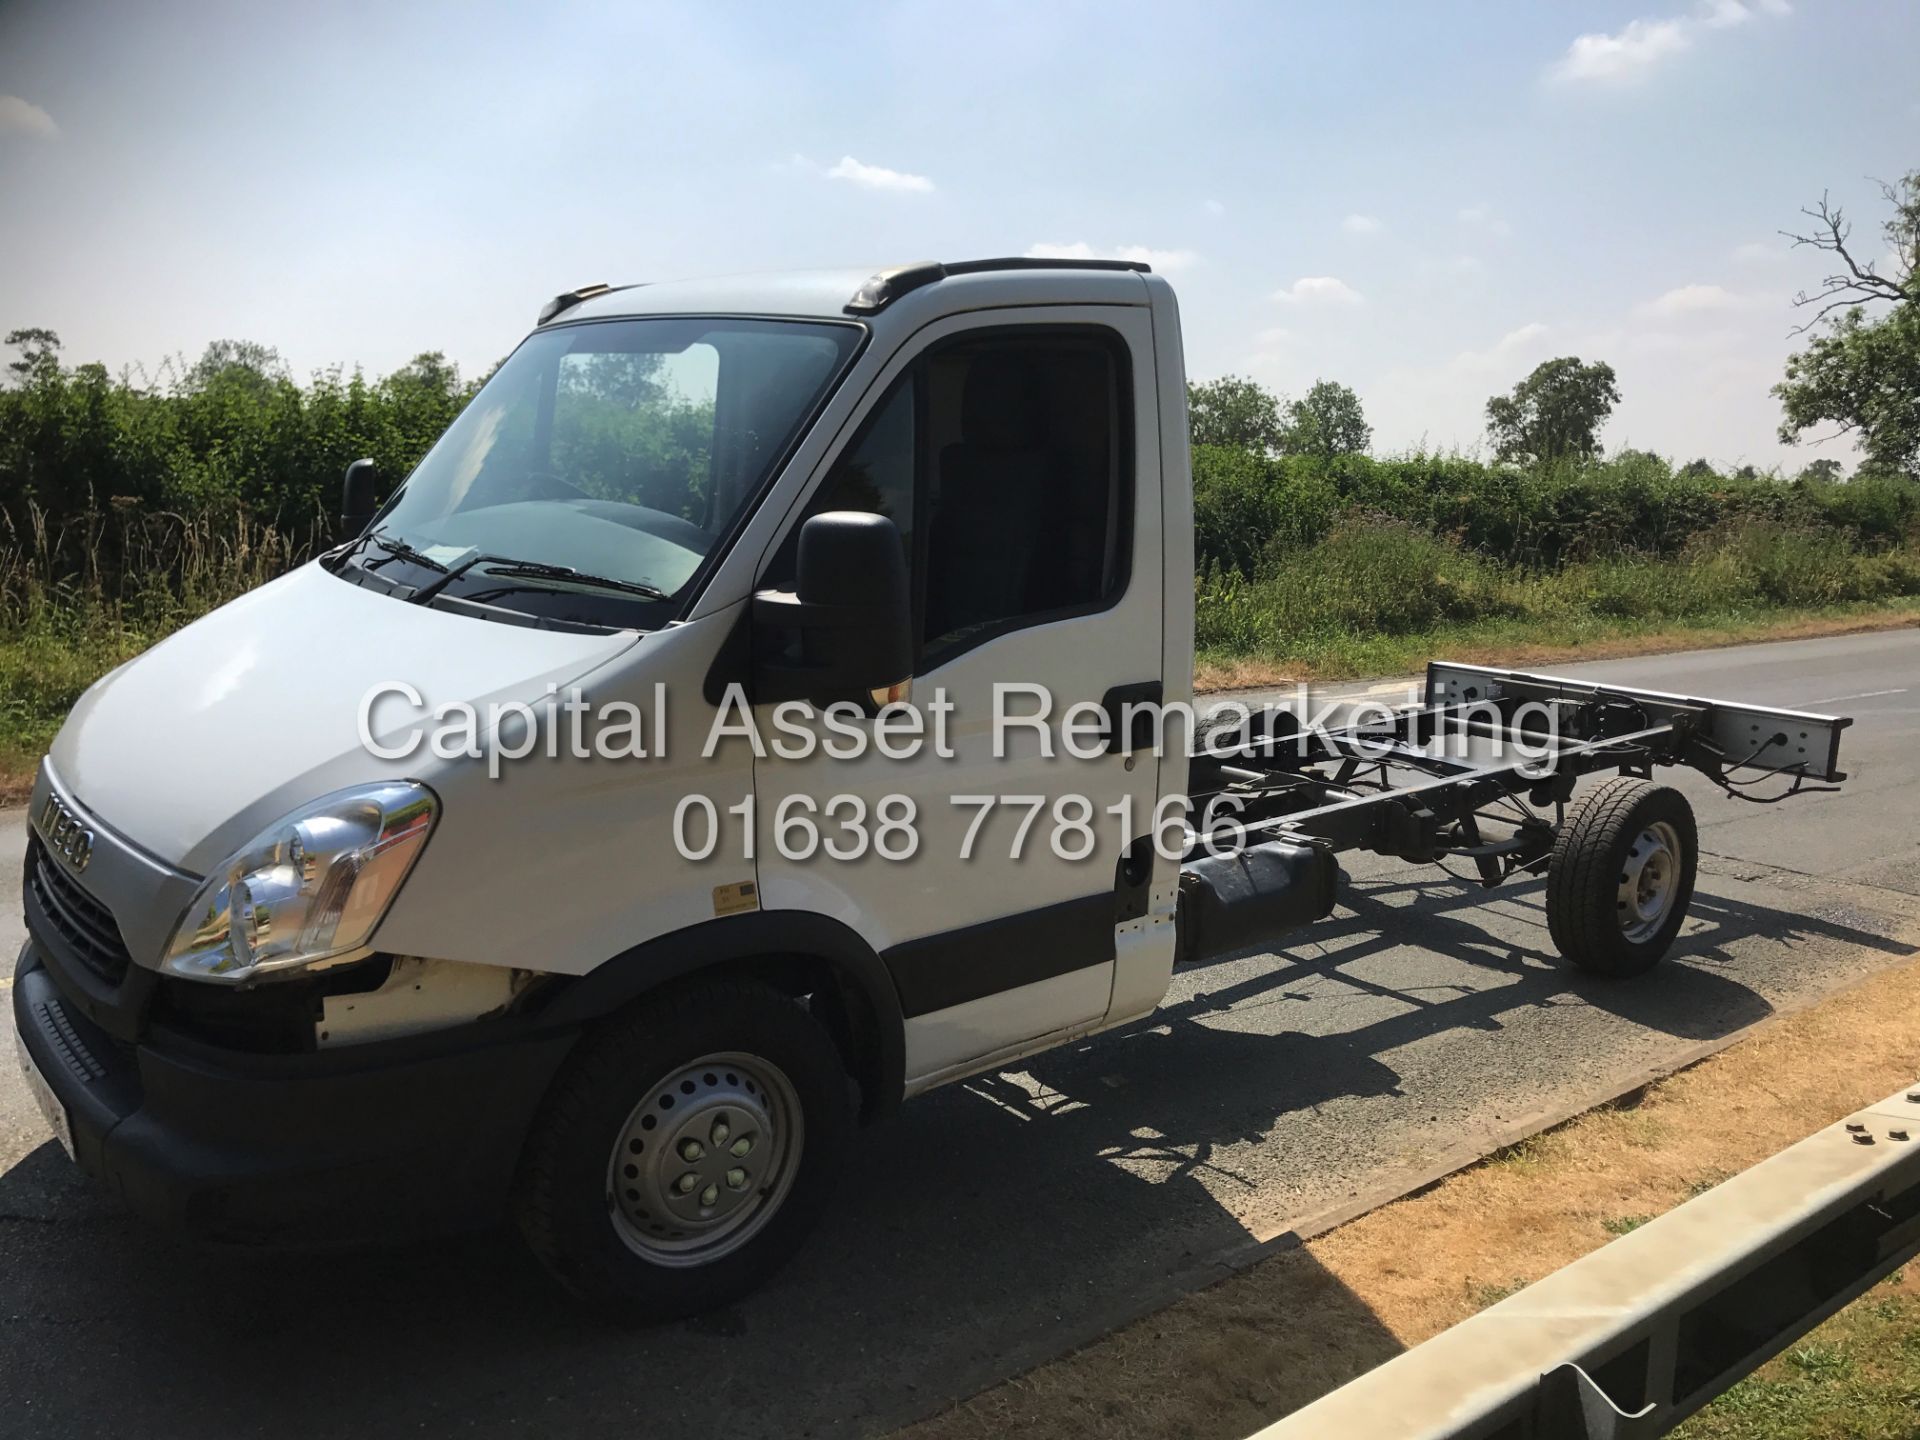 IVECO DAILY 35S11 (2013 - 13 REG) LWB / CHASSIS CAB **IDEAL TRANSPORTER CONVERSION** 1 OWNER - Image 2 of 8